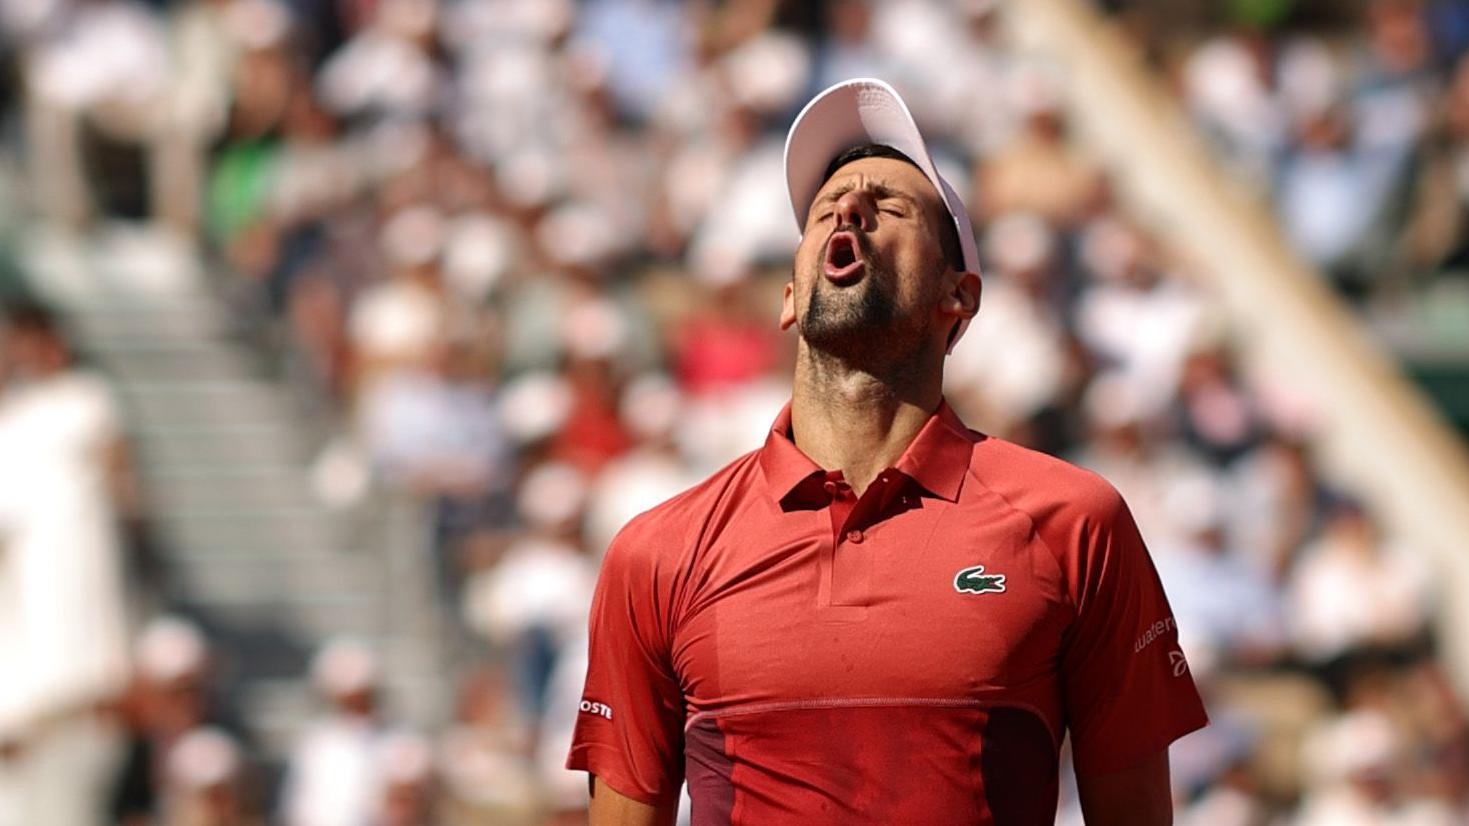 Injured Djokovic withdraws from French Open